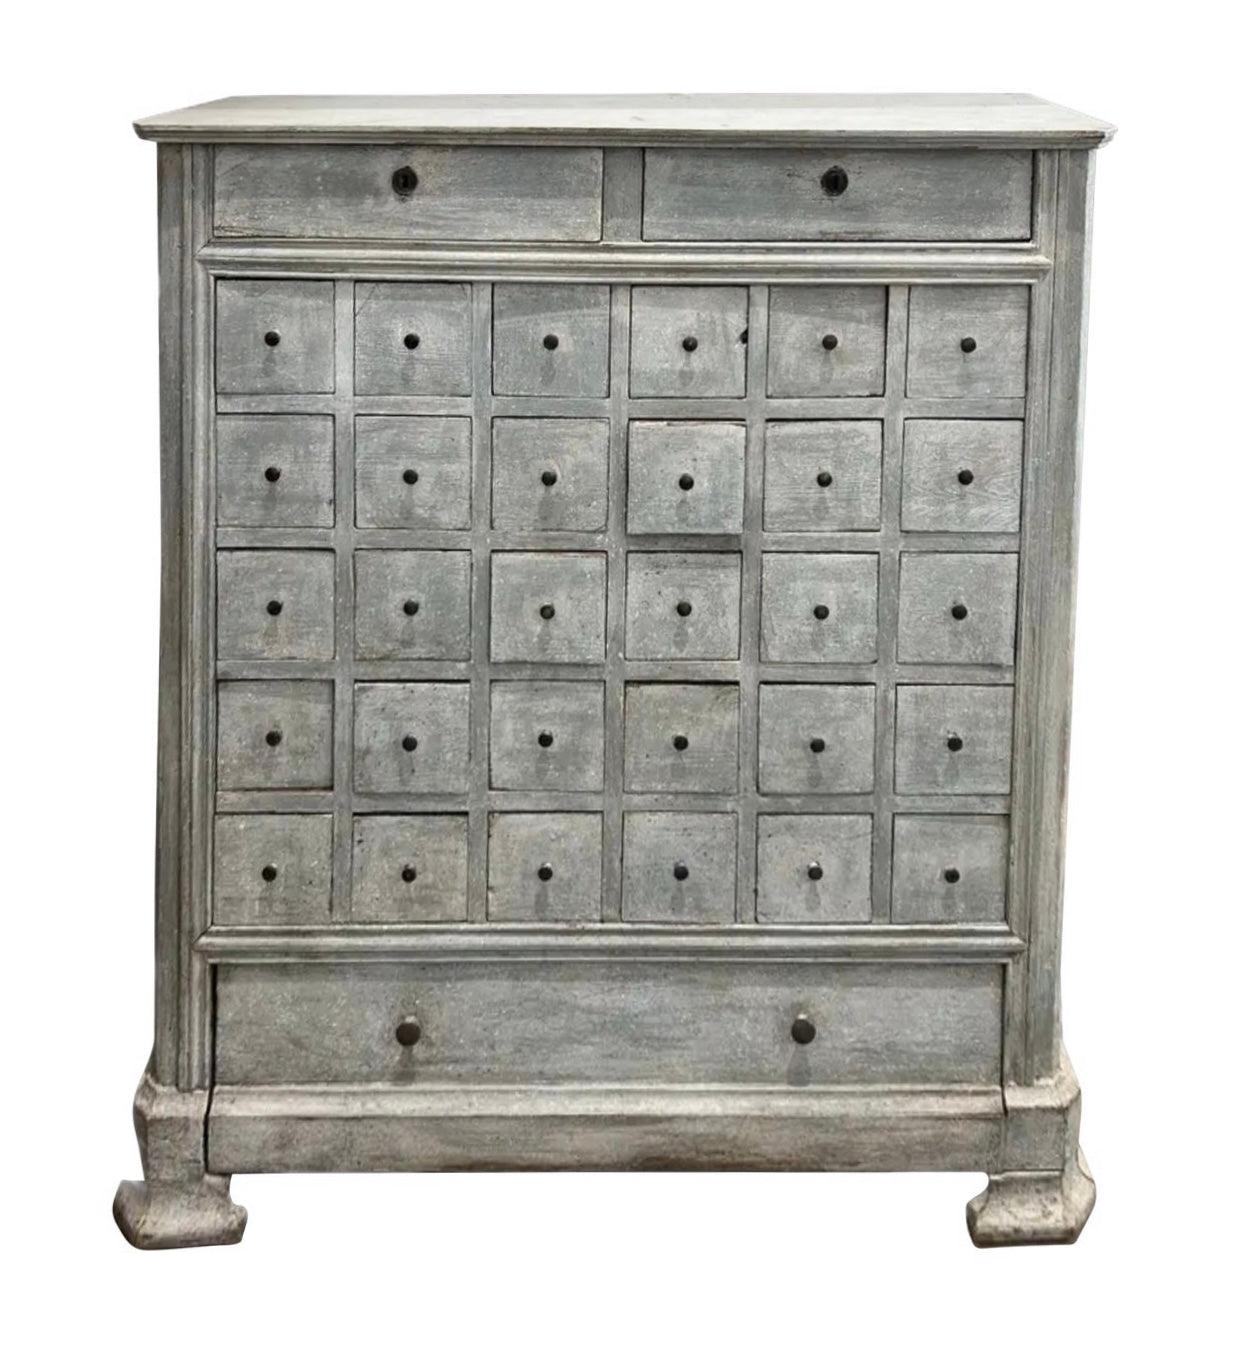 Blue Bank of Drawers - The White Barn Antiques